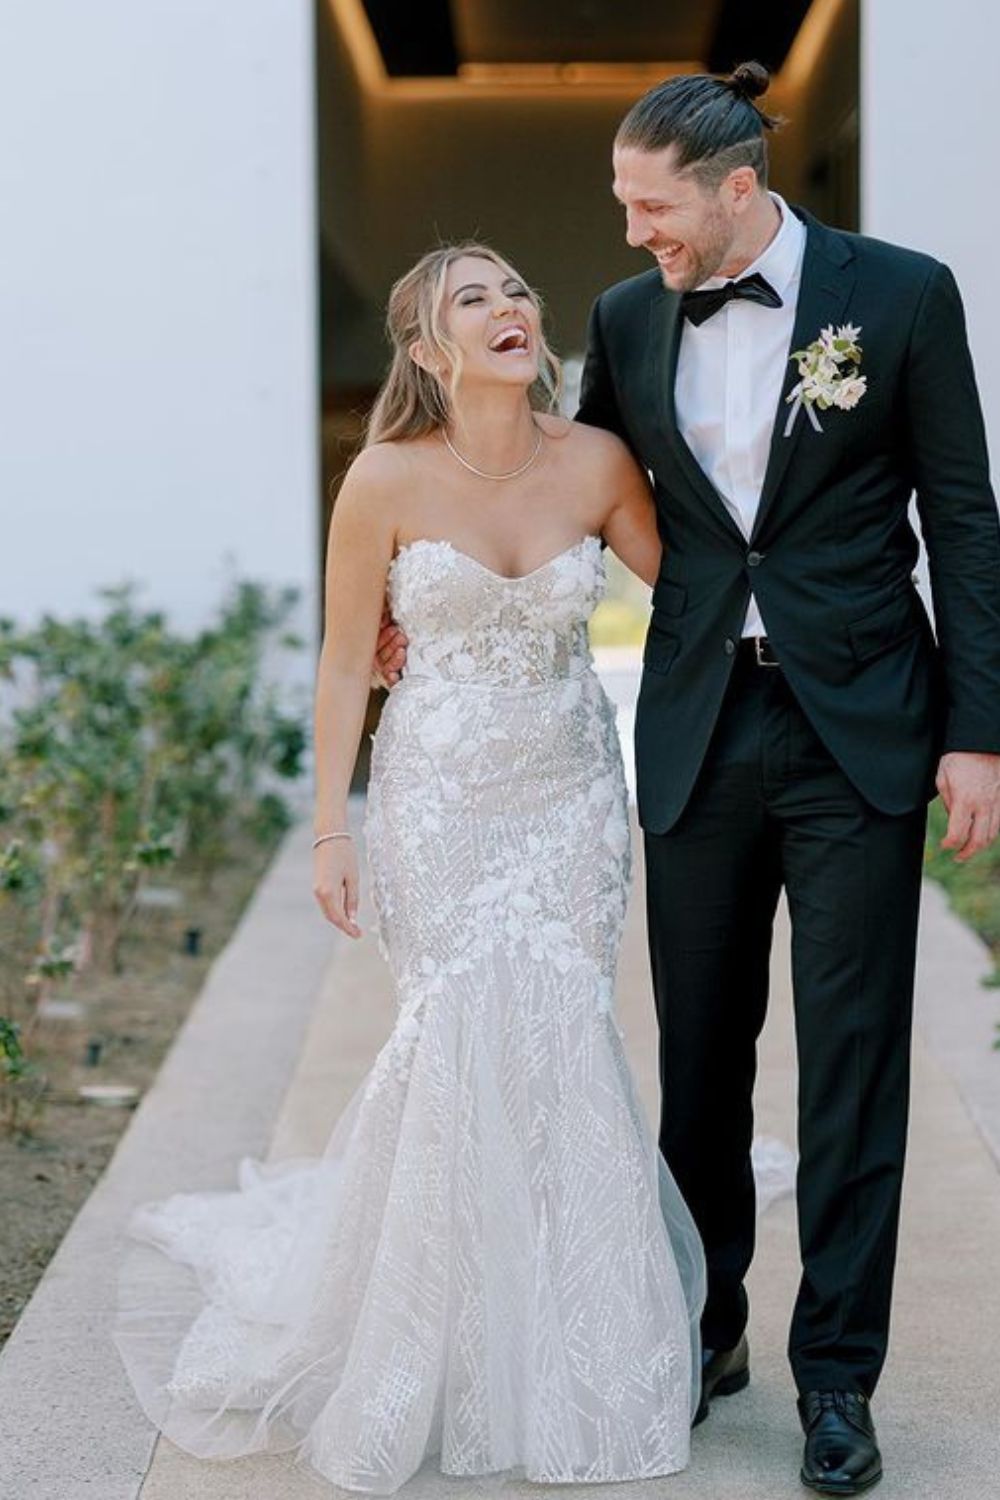 Jake Marisnick Married His Girlfriend, Brittany